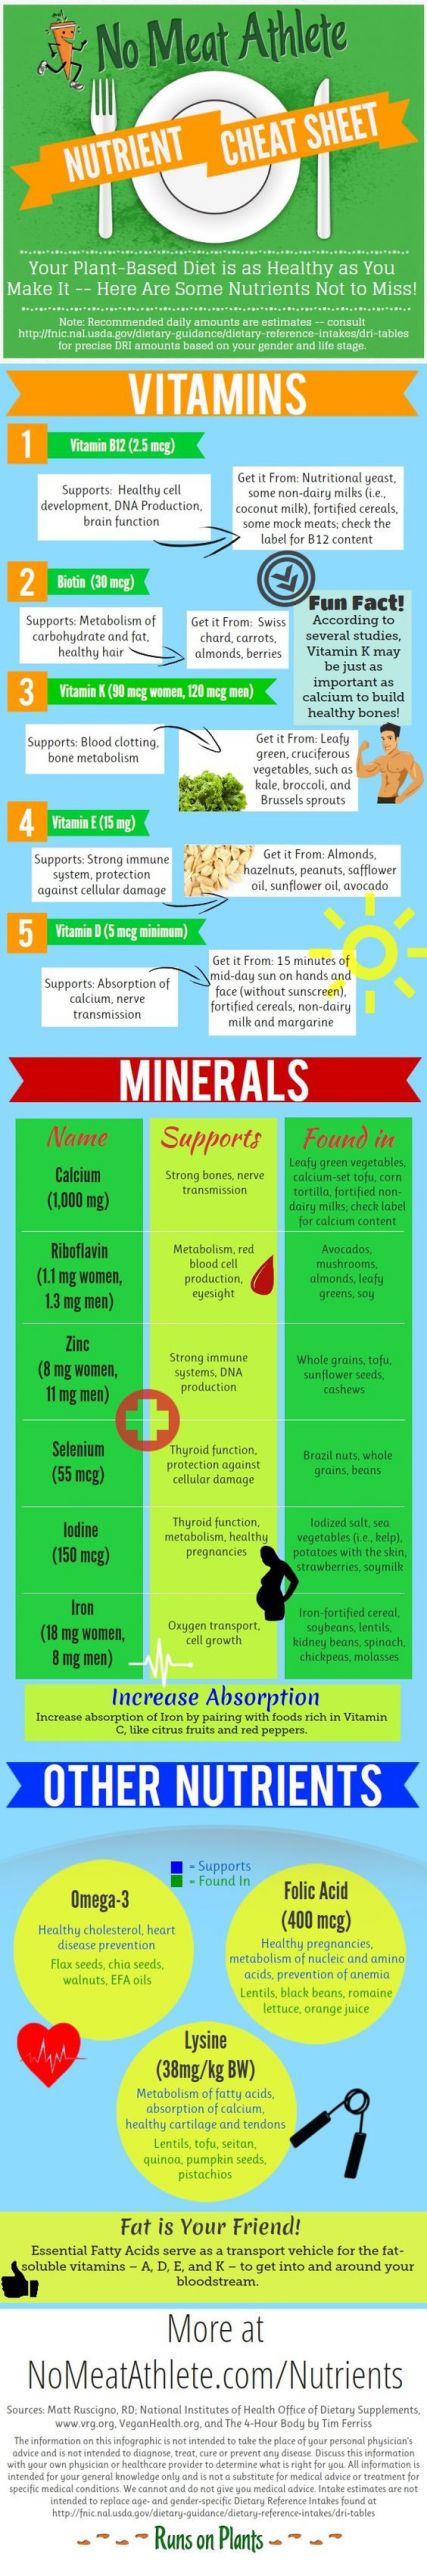 Plant Based Diet For Athletes
 Ve arian ts Minerals and To miss on Pinterest